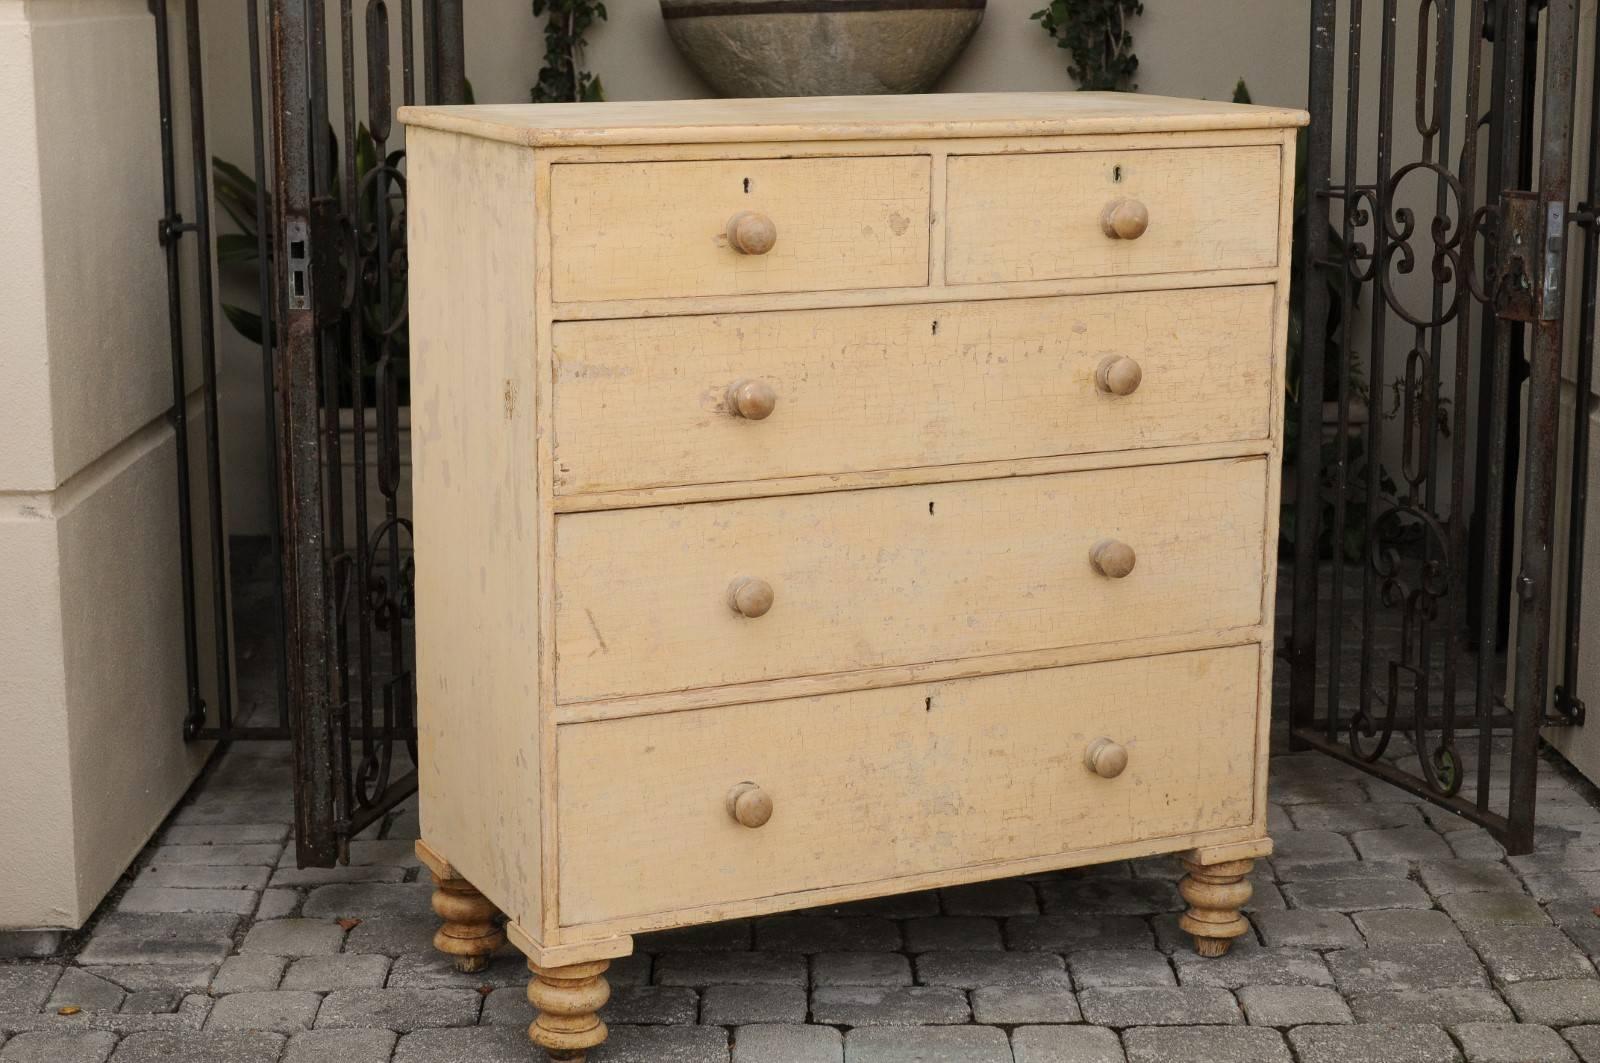 Wood English 1850s Georgian Style Five-Drawer Chest with Dry-Scrubbed Original Paint